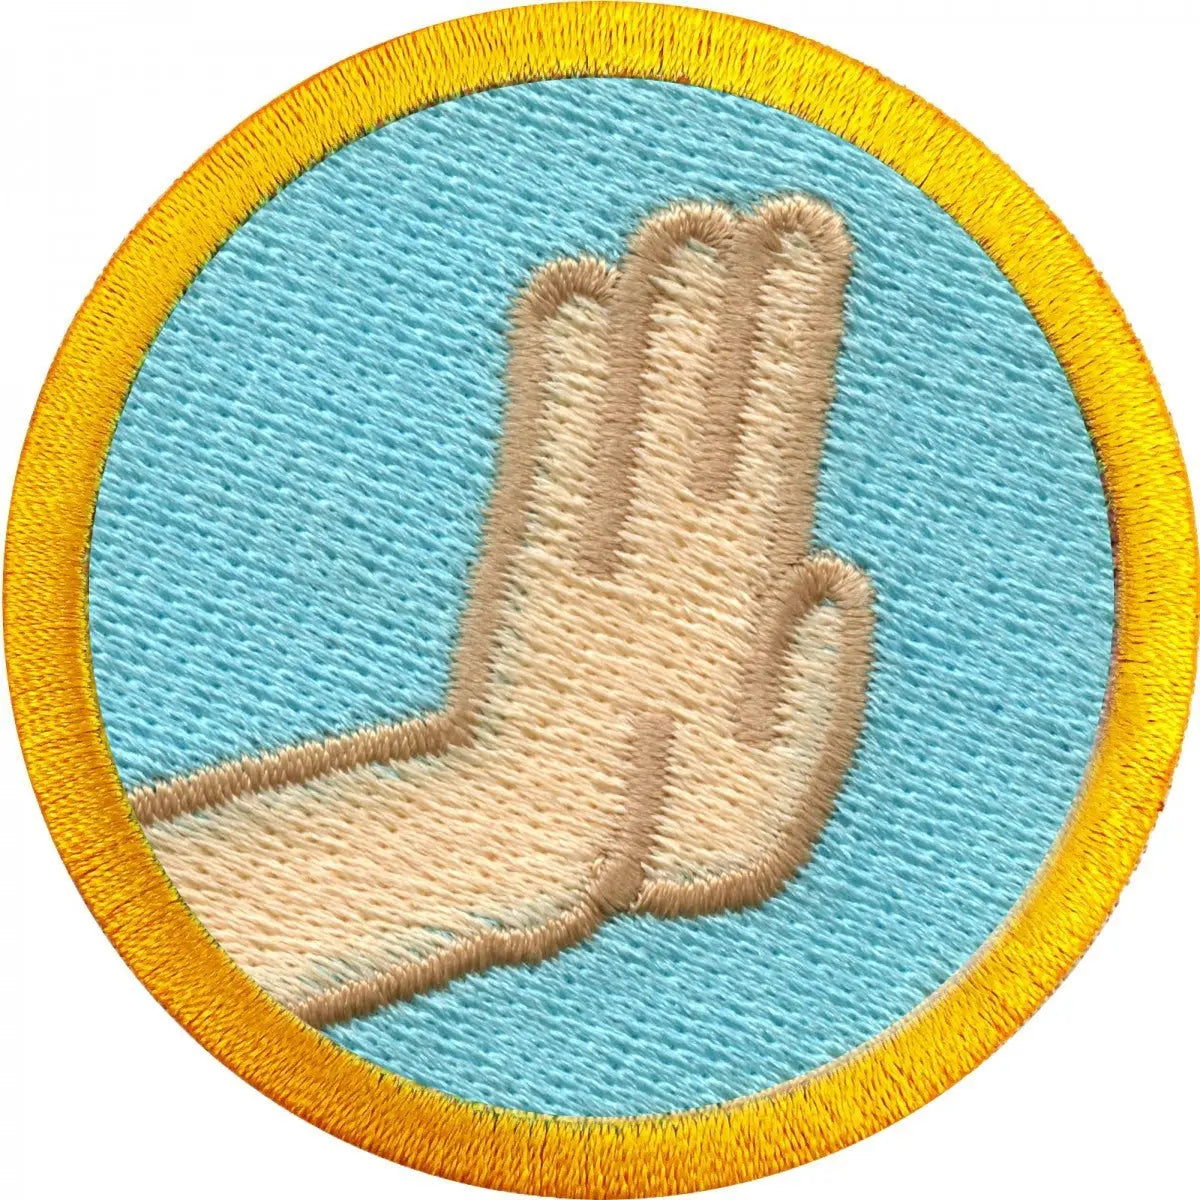 Directing Traffic Scout Merit Badge Embroidered Iron-on Patch 